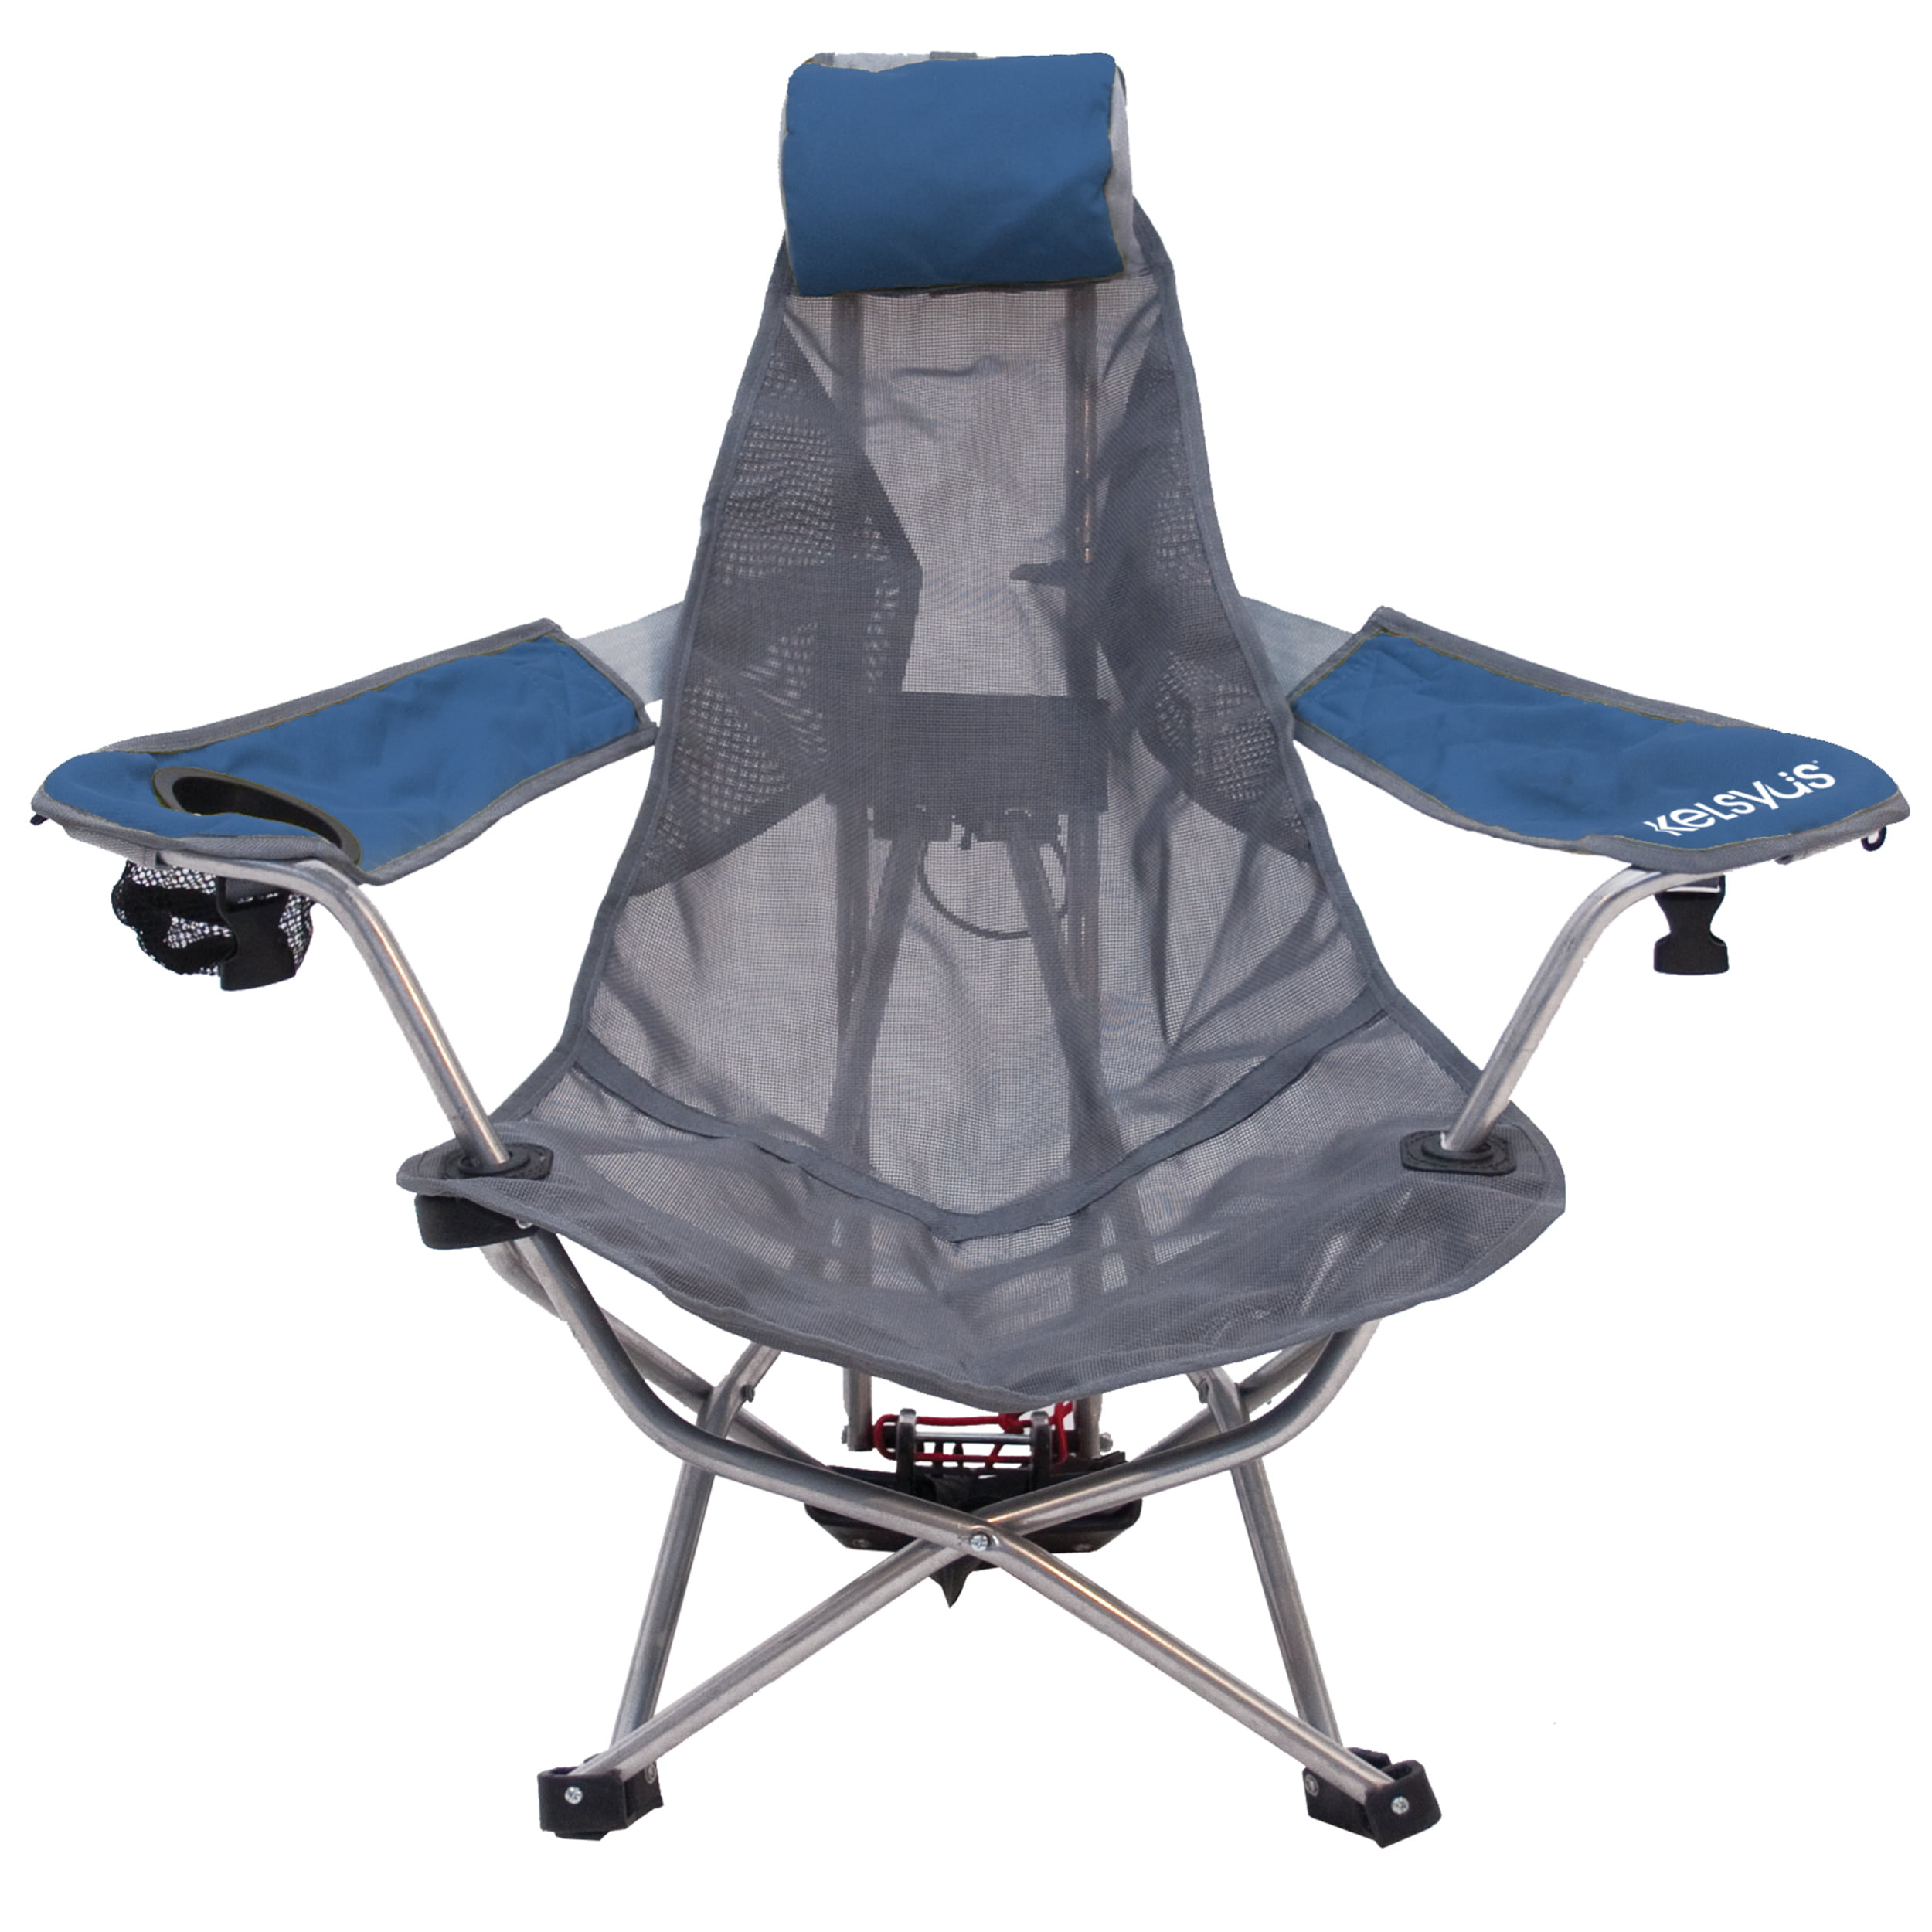 Kelsyus 80188 Original Canopy Chair Navy/Gray for sale online 